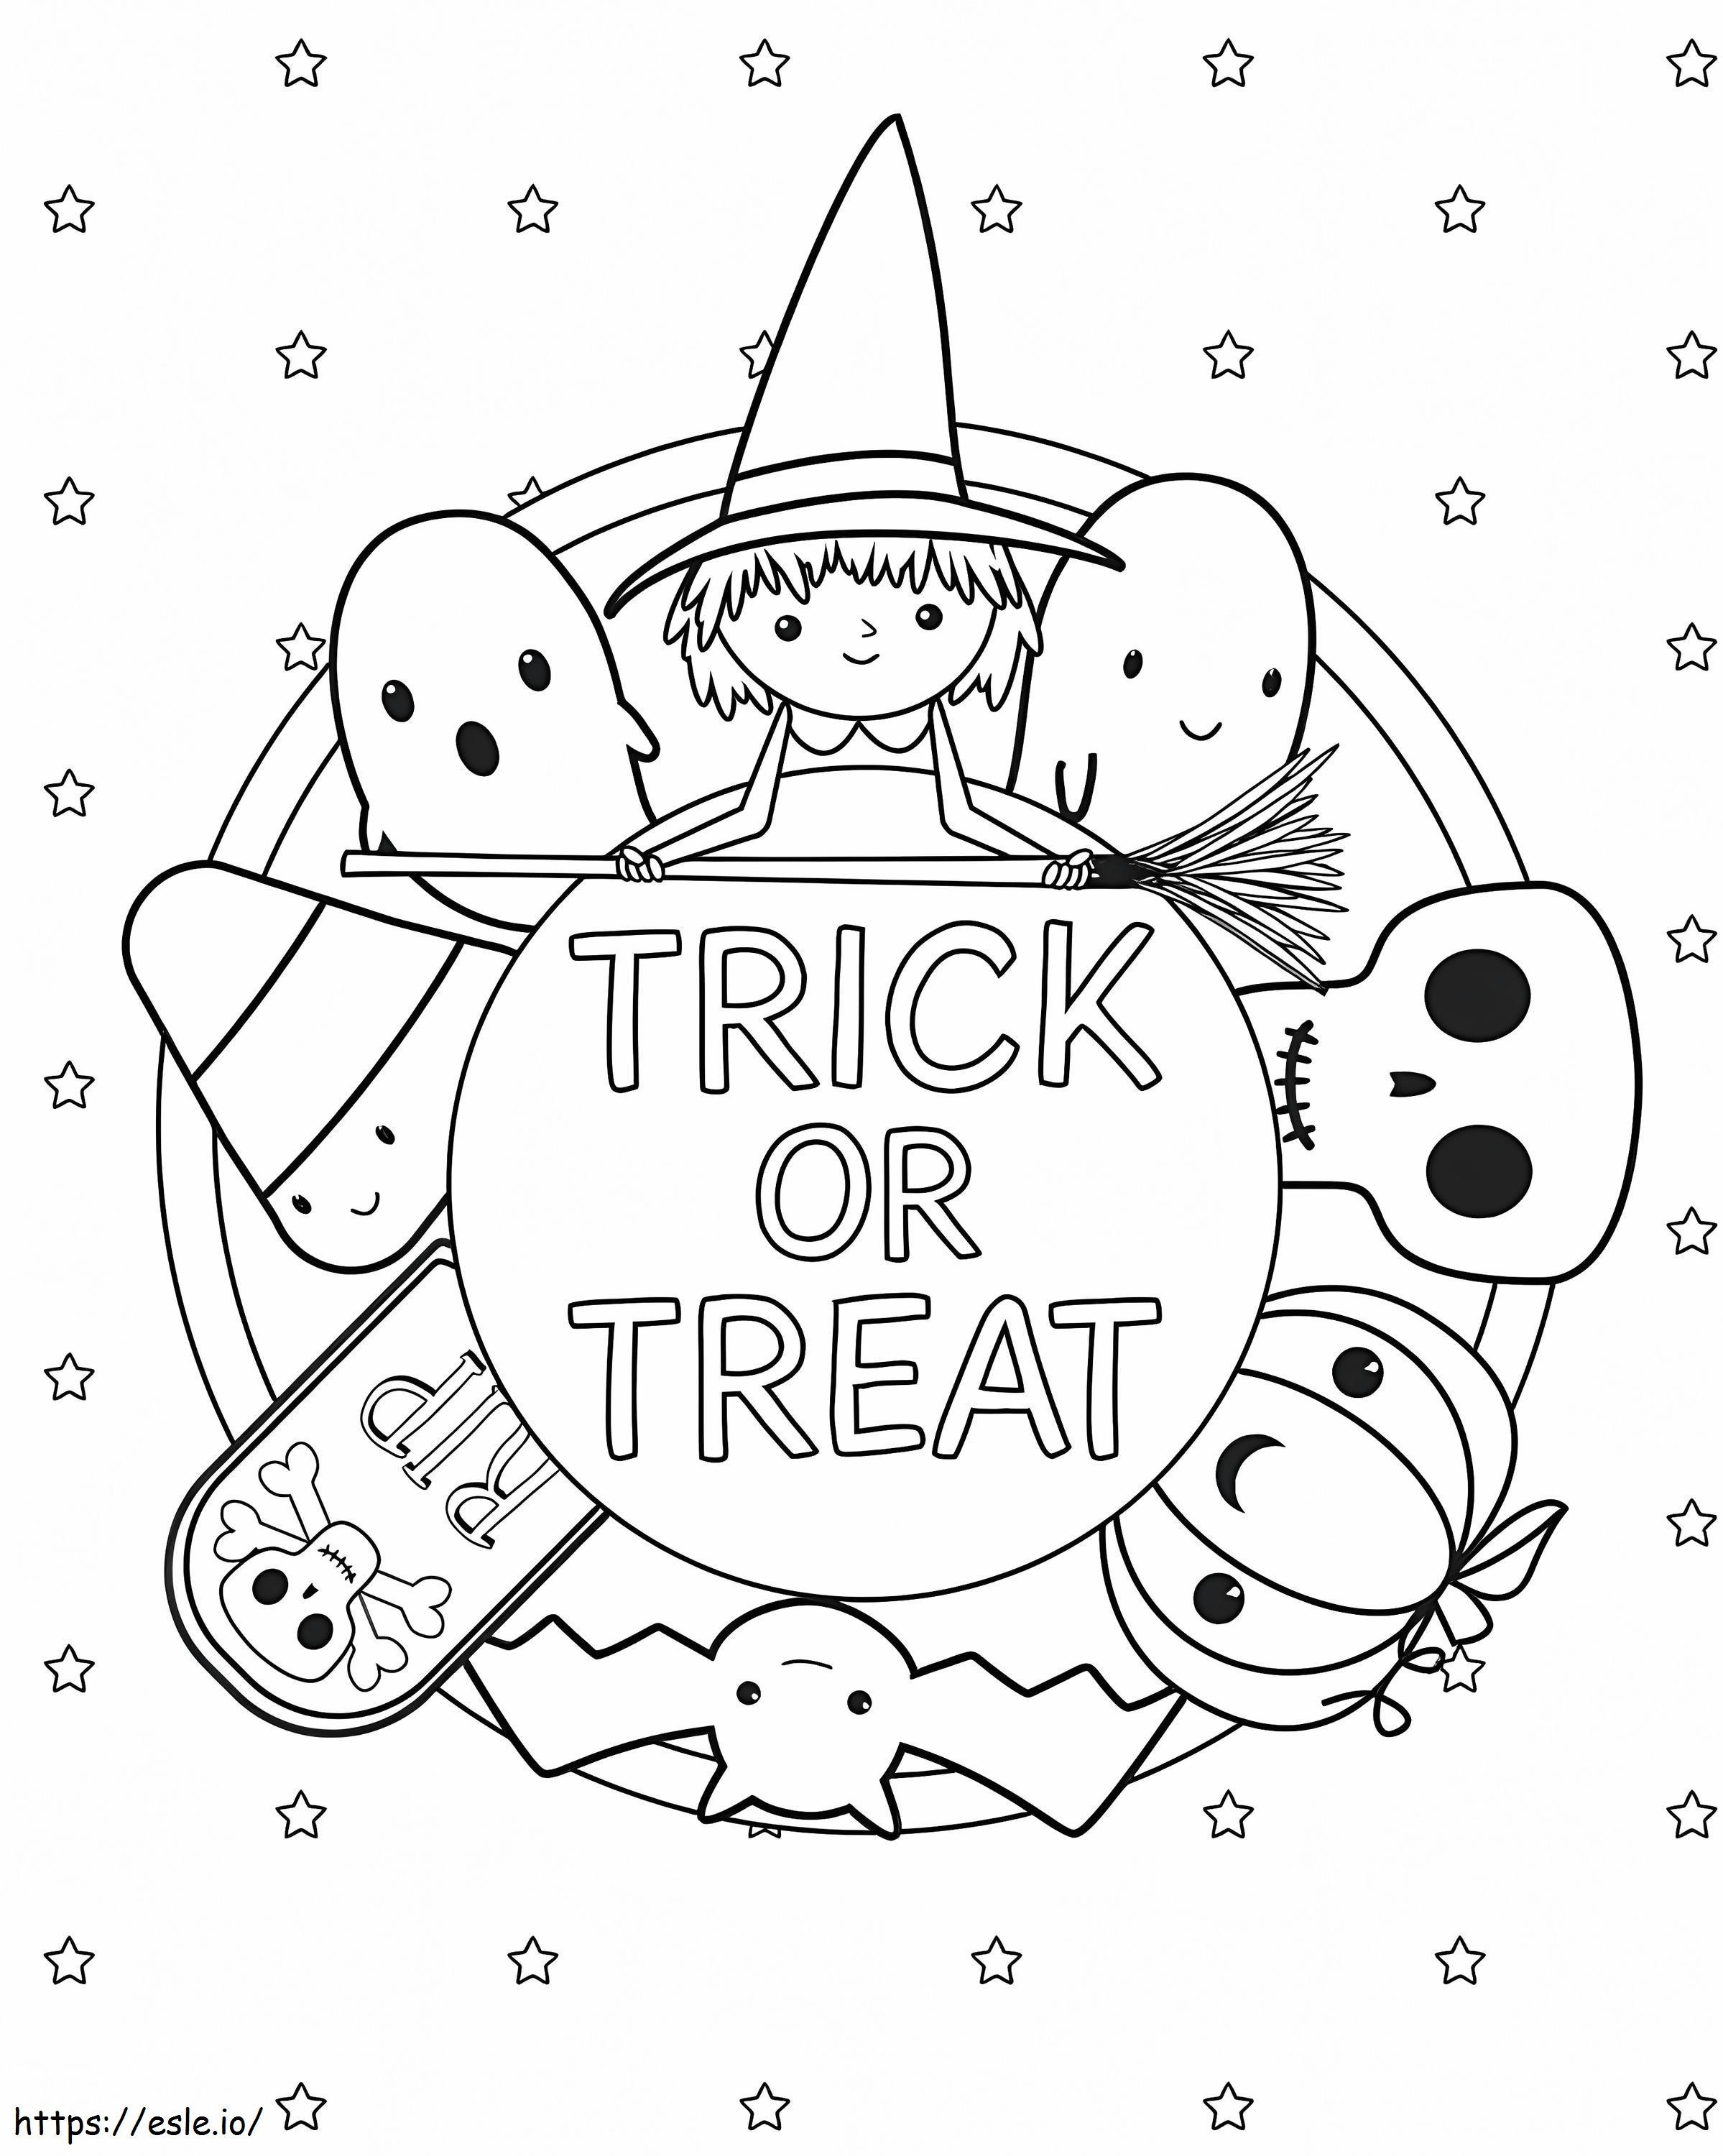 Trick Or Treat 1 coloring page